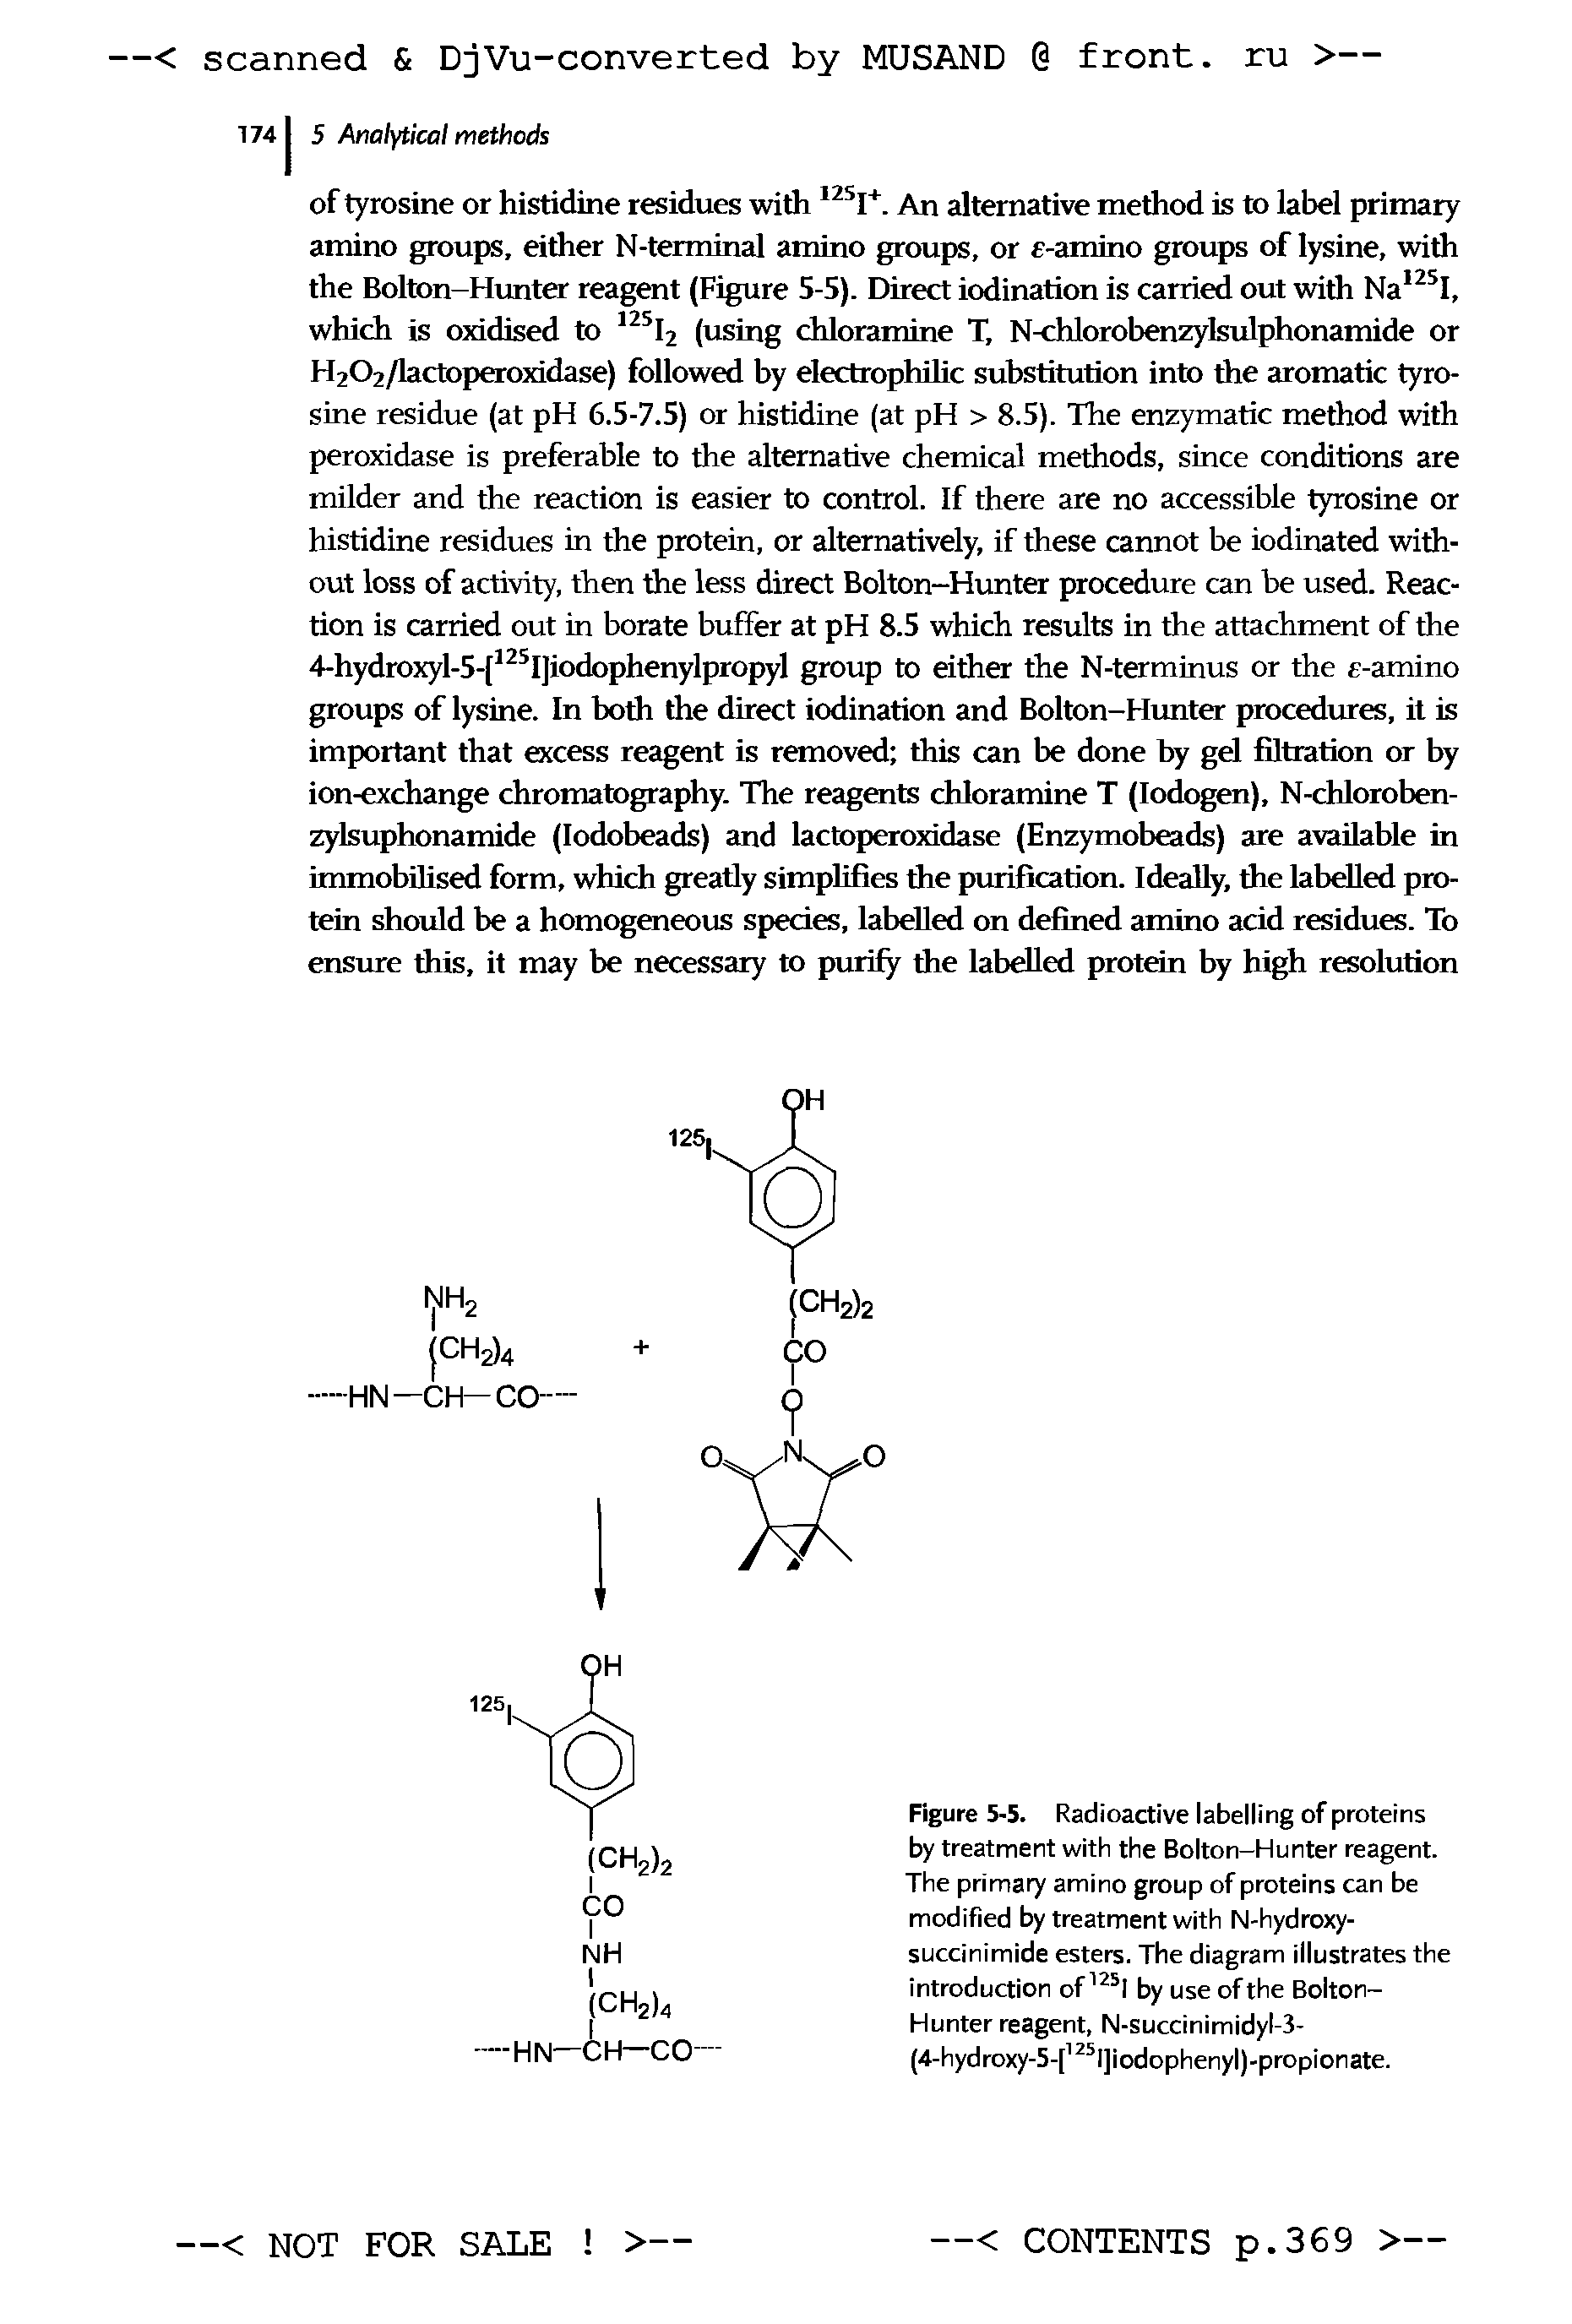 Figure 5-5. Radioactive labelling of proteins by treatment with the Bolton-Hunter reagent. The primary amino group of proteins can be modified by treatment with N-hydroxy-succinimide esters. The diagram illustrates the introduction of 125l by use of the Bolton-Hunter reagent, N-succinimidyl-3-(4-hydroxy-5-[125l]iodophenyl)-propionate.